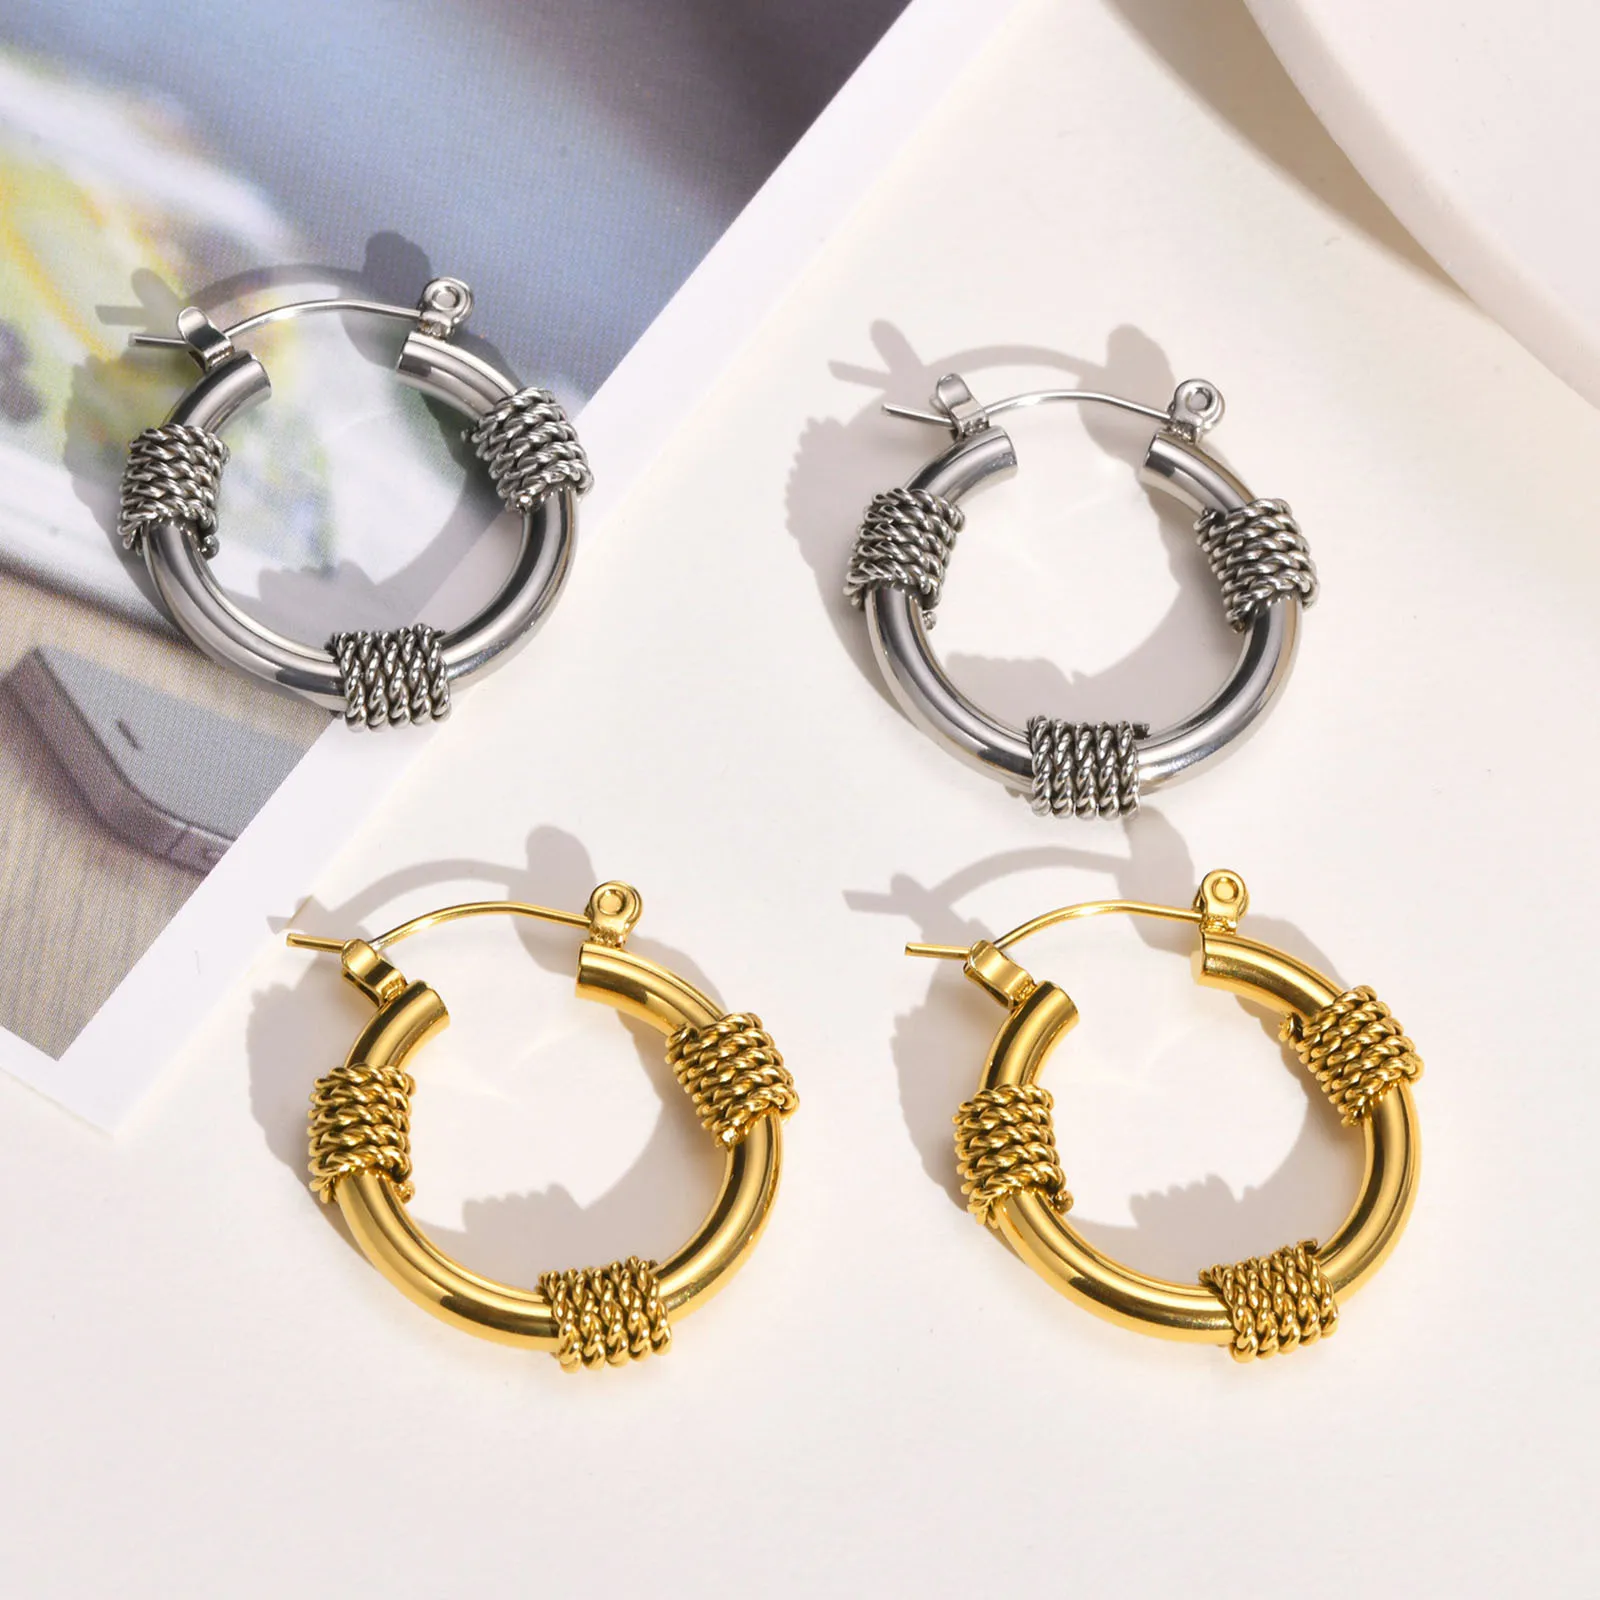 

Water Proof 316L Stainless Steel 5mm Wire PVD Gold Plating Hoop Earrings For Men and Women